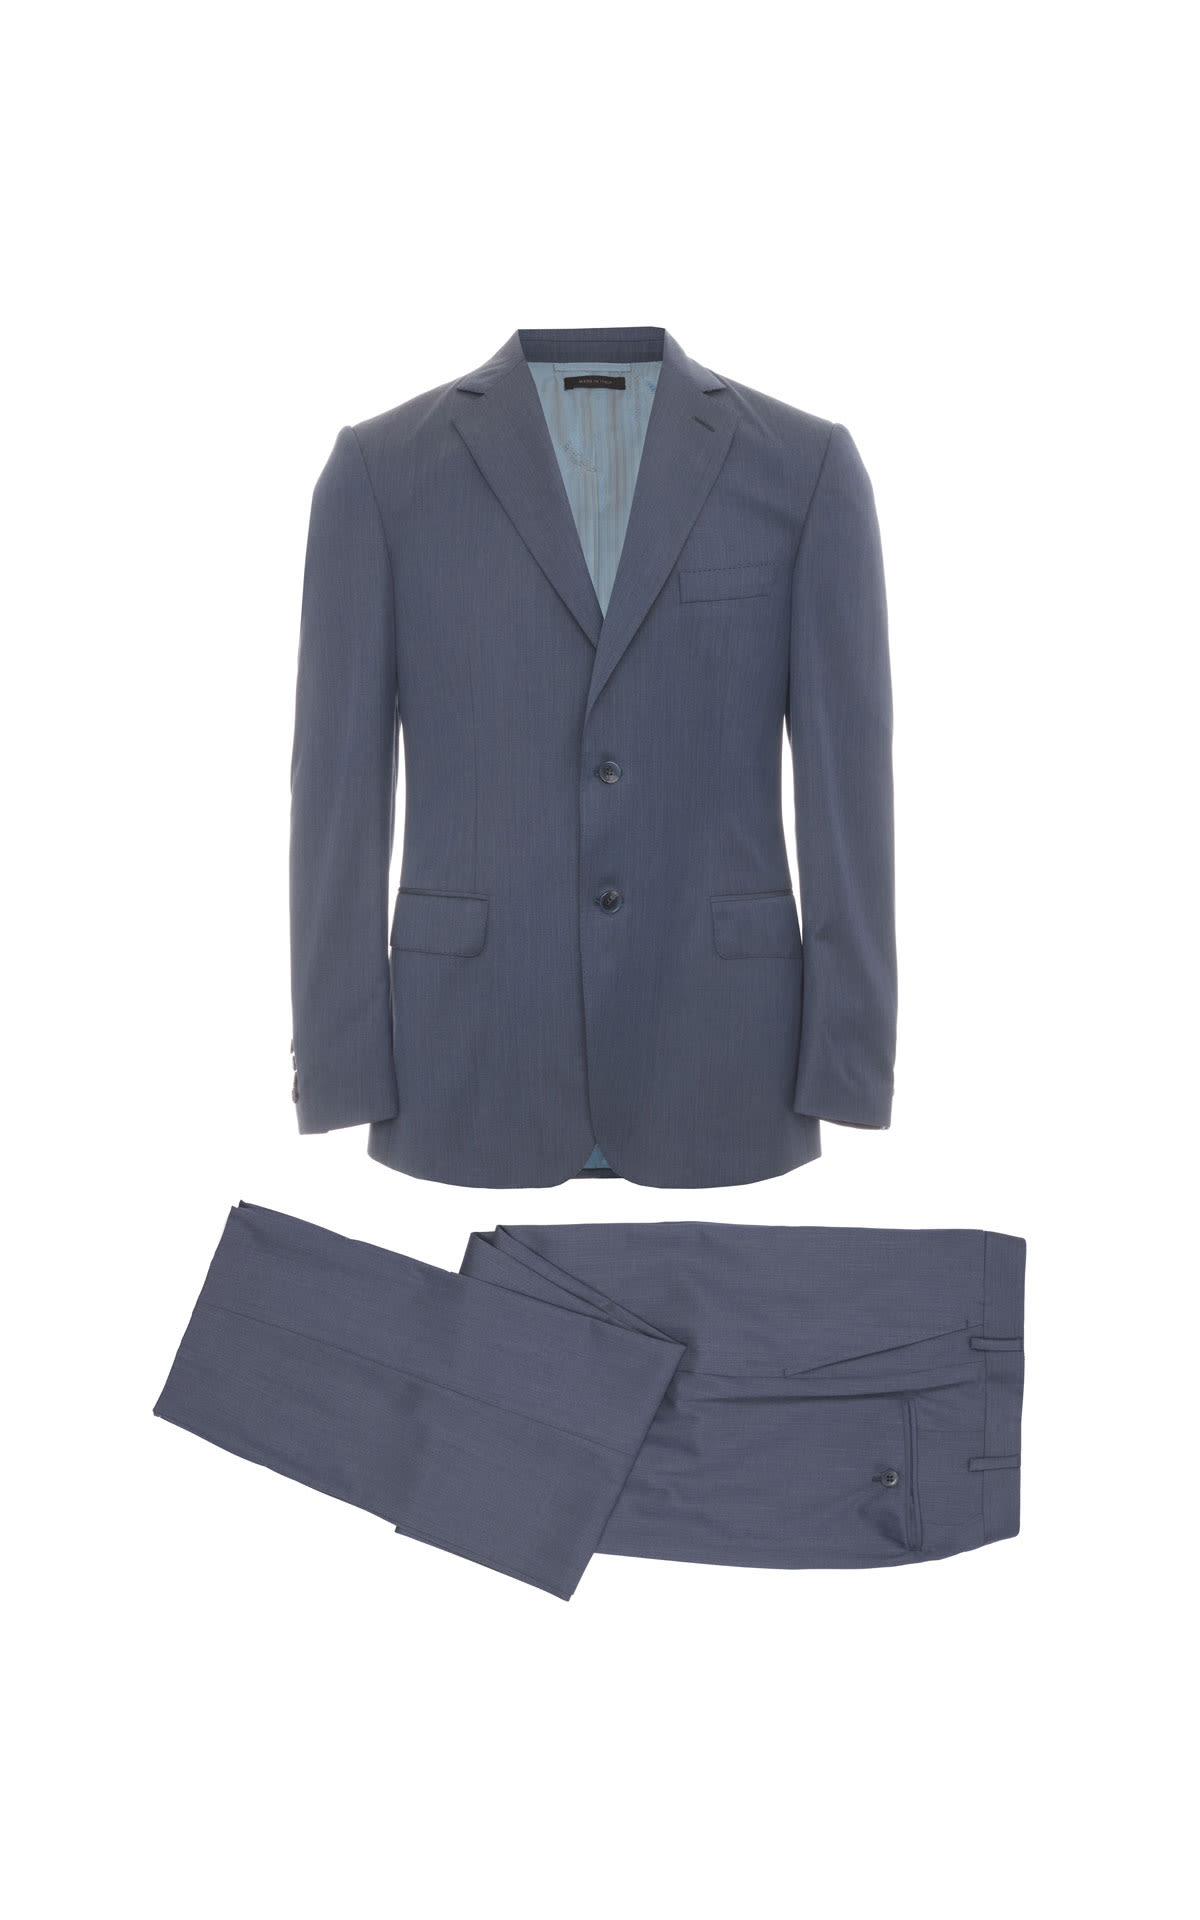 Brioni Tailoring suit from Bicester Village